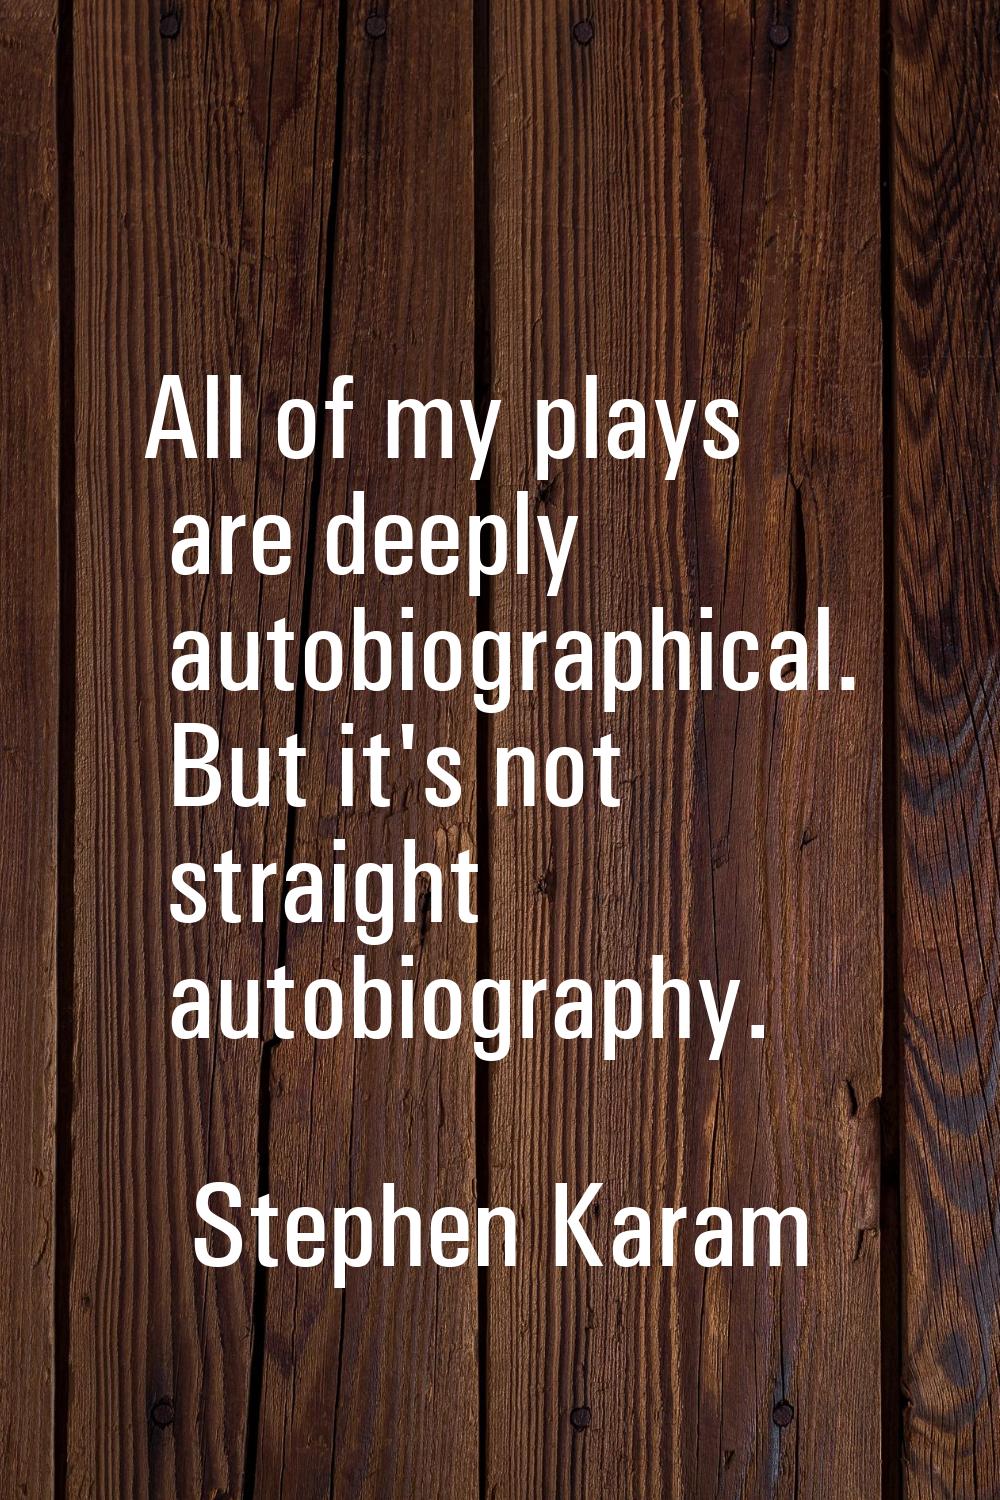 All of my plays are deeply autobiographical. But it's not straight autobiography.